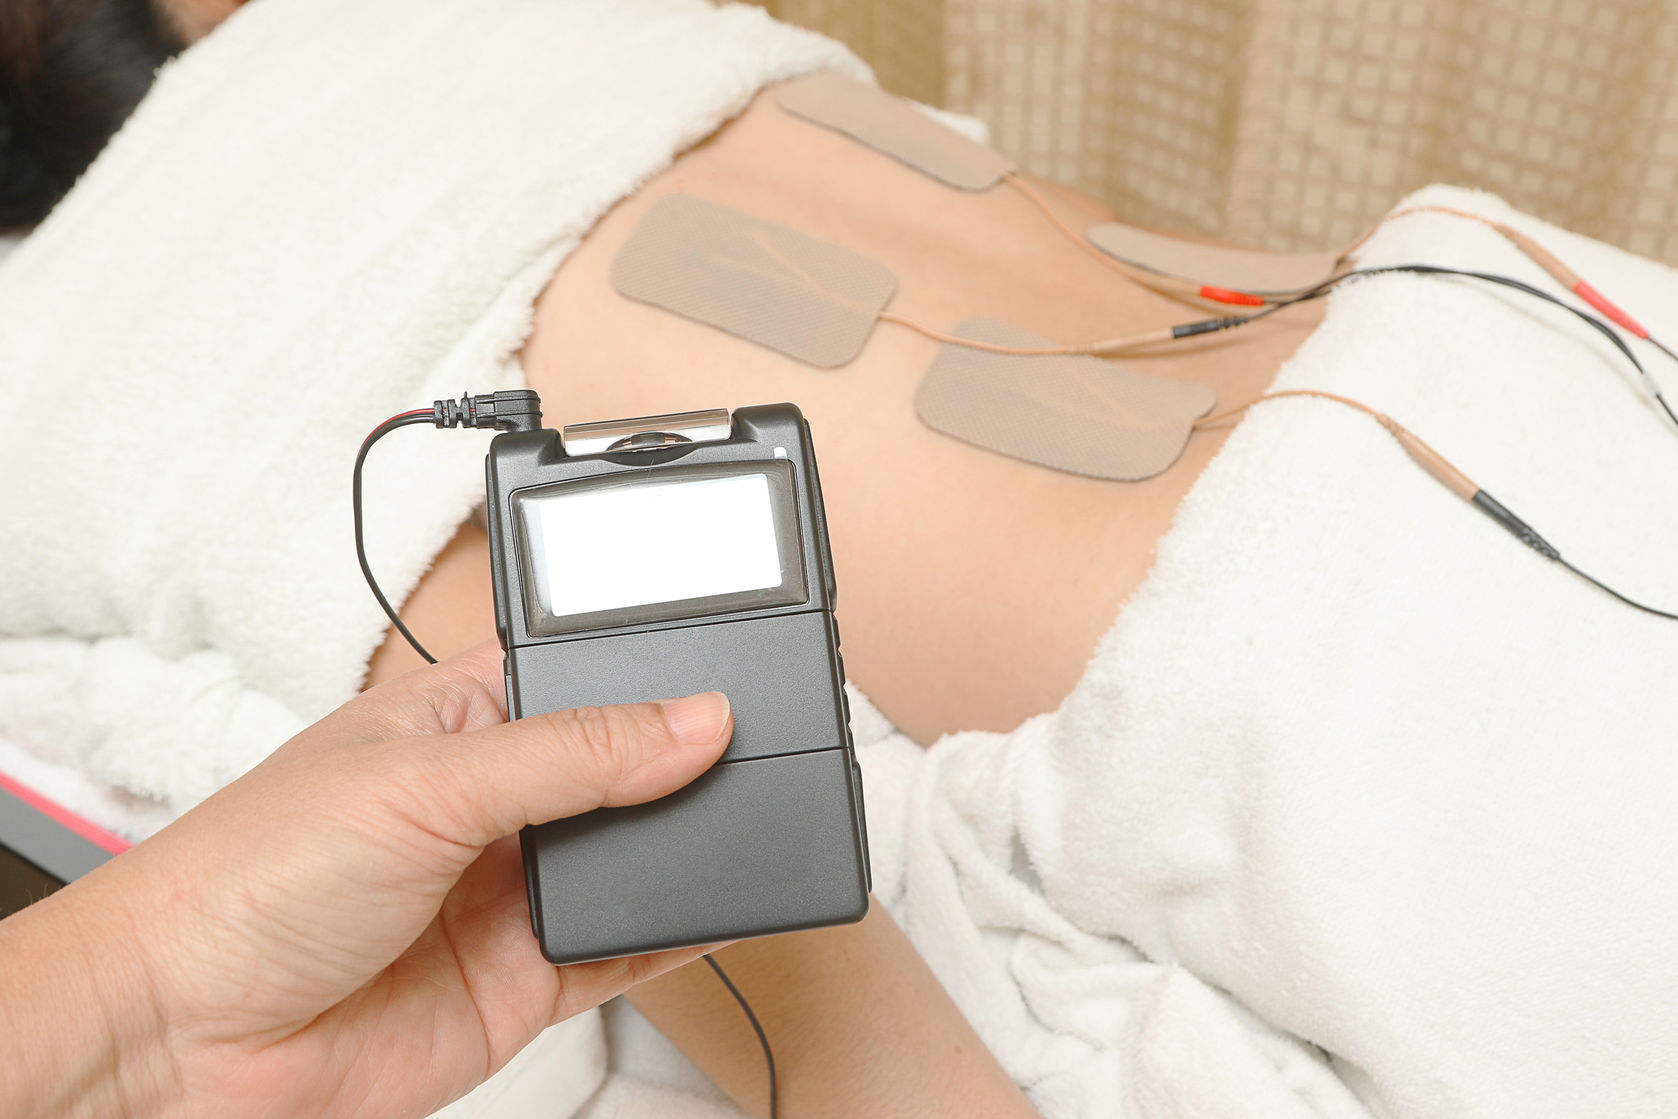 Electrical Stimulation Therapy Pennsylvania - Physical Therapy Institute